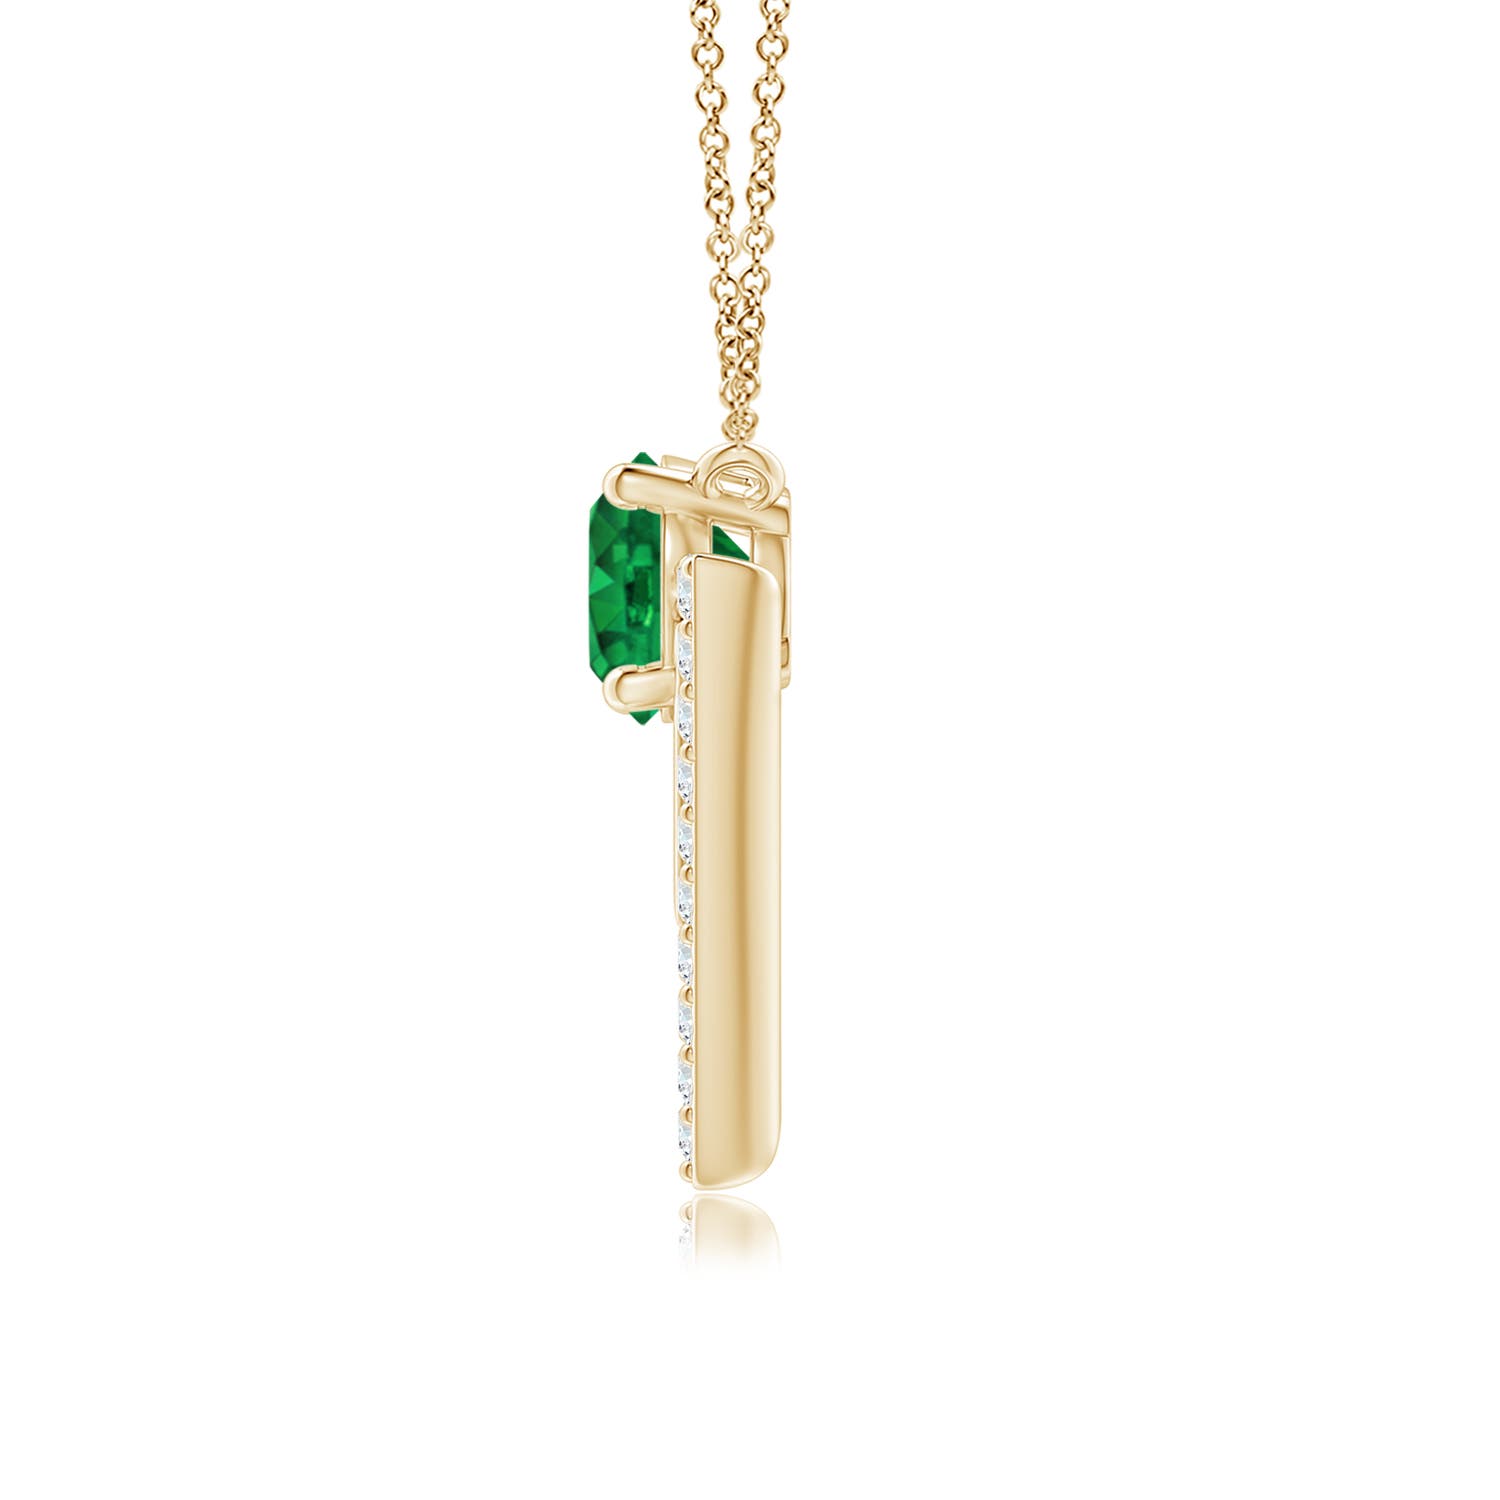 AAA - Emerald / 0.63 CT / 14 KT Yellow Gold